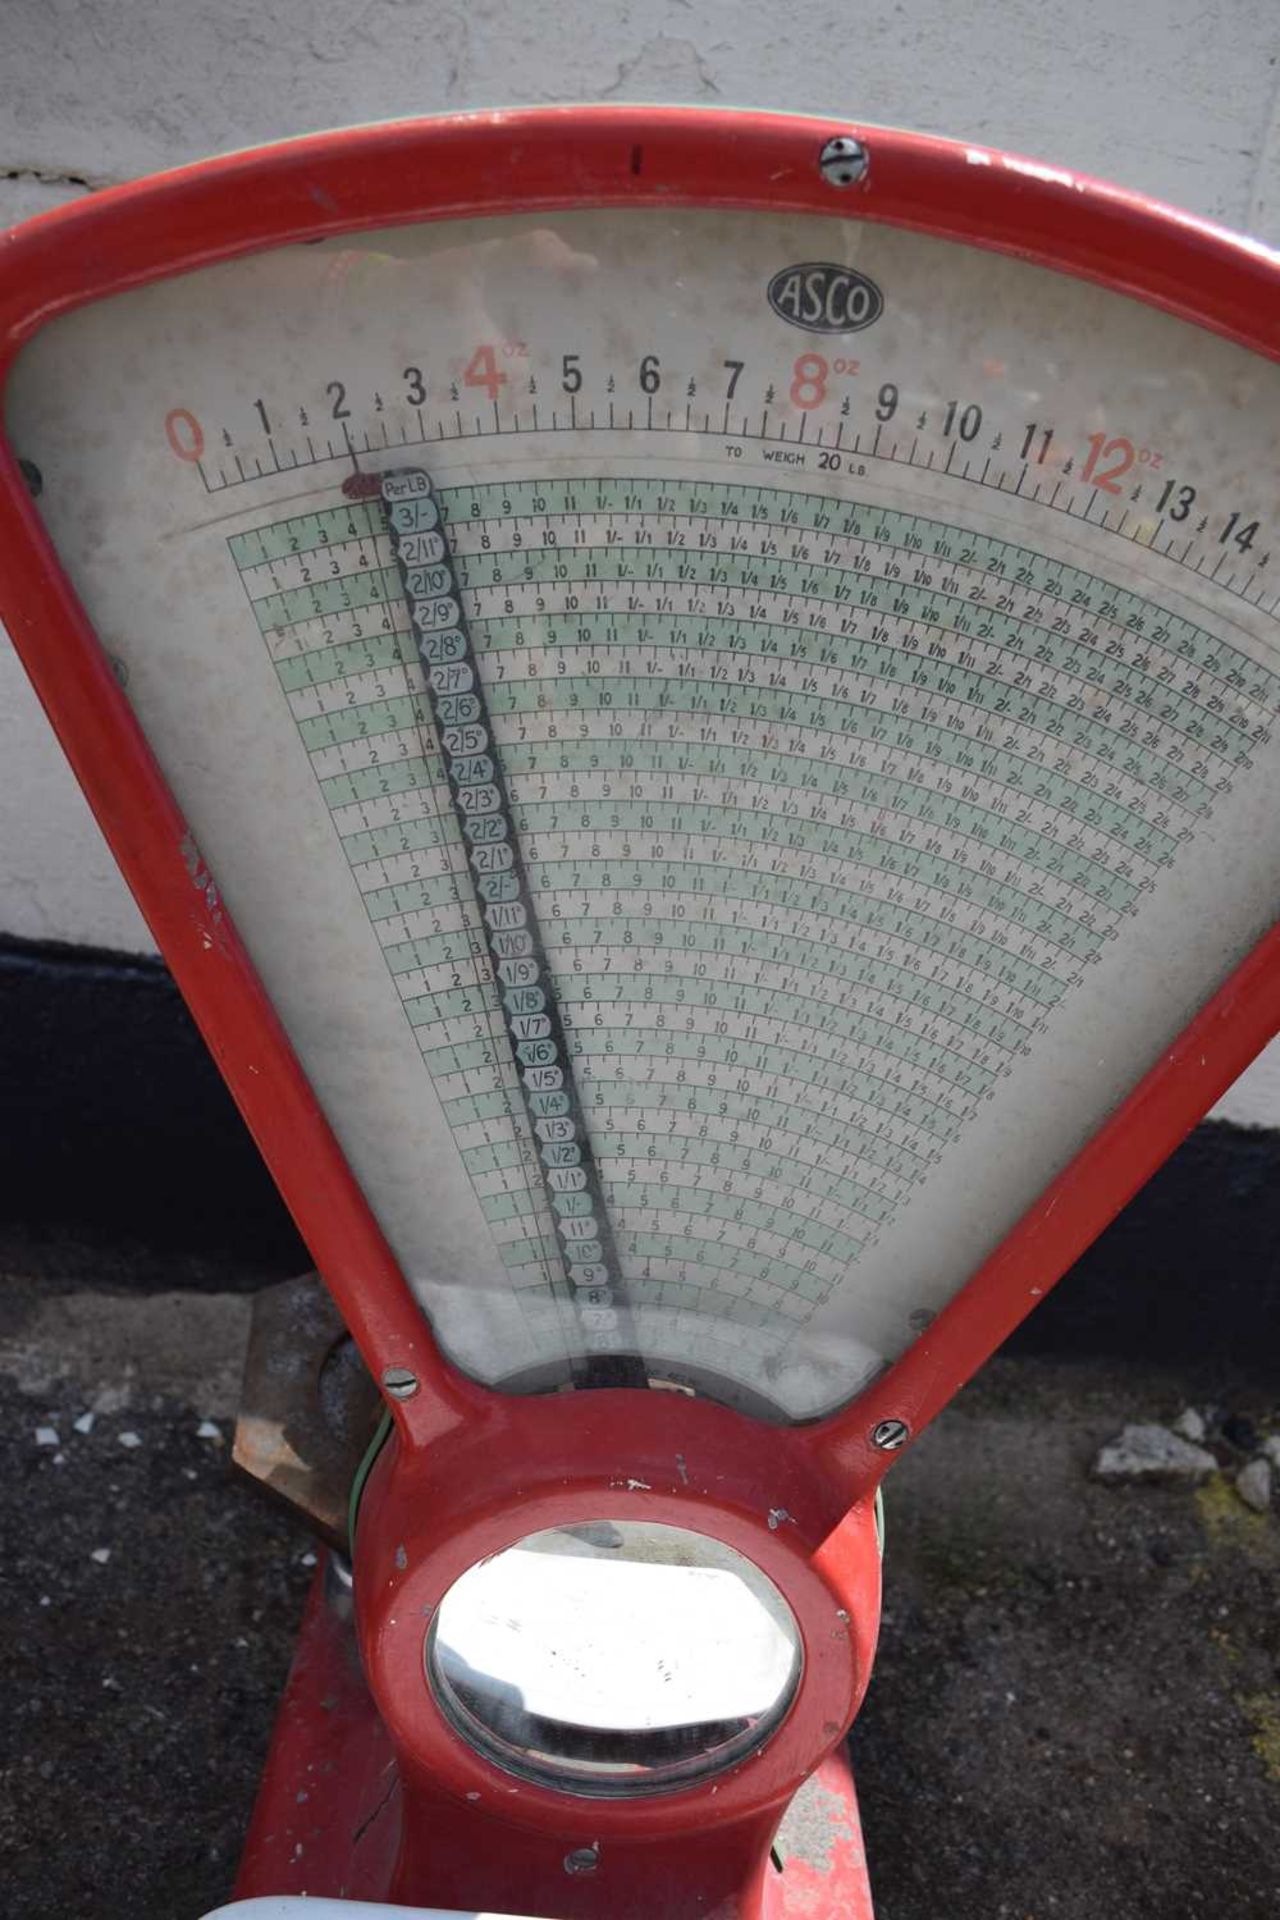 broadheath ASCO Manchester scales including weights - Image 2 of 2